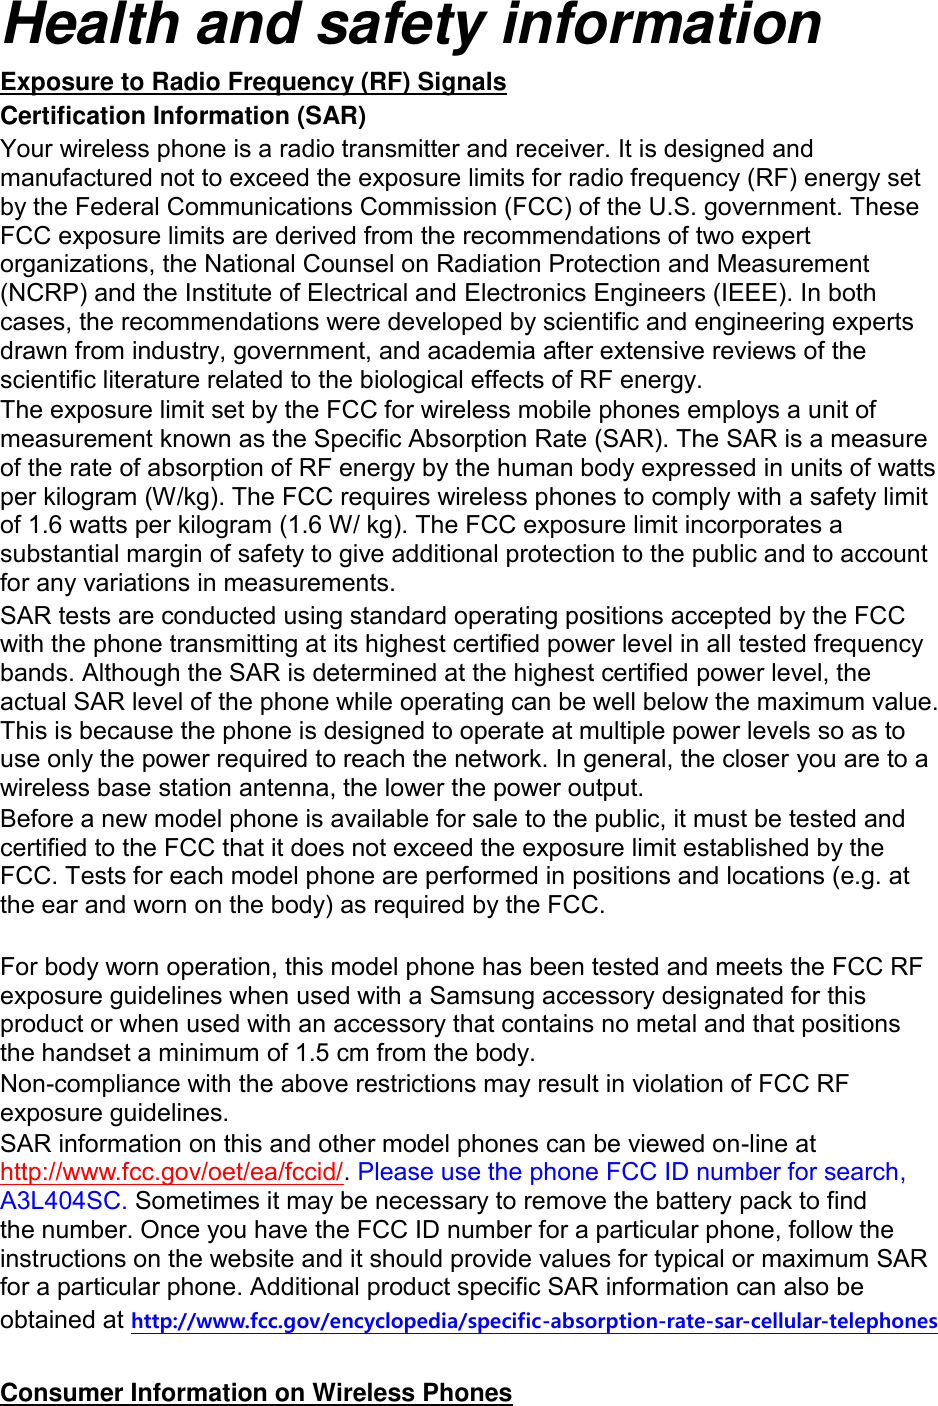 Health and safety information Exposure to Radio Frequency (RF) Signals Certification Information (SAR) Your wireless phone is a radio transmitter and receiver. It is designed and manufactured not to exceed the exposure limits for radio frequency (RF) energy set by the Federal Communications Commission (FCC) of the U.S. government. These FCC exposure limits are derived from the recommendations of two expert organizations, the National Counsel on Radiation Protection and Measurement (NCRP) and the Institute of Electrical and Electronics Engineers (IEEE). In both cases, the recommendations were developed by scientific and engineering experts drawn from industry, government, and academia after extensive reviews of the scientific literature related to the biological effects of RF energy. The exposure limit set by the FCC for wireless mobile phones employs a unit of measurement known as the Specific Absorption Rate (SAR). The SAR is a measure of the rate of absorption of RF energy by the human body expressed in units of watts per kilogram (W/kg). The FCC requires wireless phones to comply with a safety limit of 1.6 watts per kilogram (1.6 W/ kg). The FCC exposure limit incorporates a substantial margin of safety to give additional protection to the public and to account for any variations in measurements. SAR tests are conducted using standard operating positions accepted by the FCC with the phone transmitting at its highest certified power level in all tested frequency bands. Although the SAR is determined at the highest certified power level, the actual SAR level of the phone while operating can be well below the maximum value. This is because the phone is designed to operate at multiple power levels so as to use only the power required to reach the network. In general, the closer you are to a wireless base station antenna, the lower the power output. Before a new model phone is available for sale to the public, it must be tested and certified to the FCC that it does not exceed the exposure limit established by the FCC. Tests for each model phone are performed in positions and locations (e.g. at the ear and worn on the body) as required by the FCC.      For body worn operation, this model phone has been tested and meets the FCC RF exposure guidelines when used with a Samsung accessory designated for this product or when used with an accessory that contains no metal and that positions the handset a minimum of 1.5 cm from the body.   Non-compliance with the above restrictions may result in violation of FCC RF exposure guidelines. SAR information on this and other model phones can be viewed on-line at http://www.fcc.gov/oet/ea/fccid/. Please use the phone FCC ID number for search, A3L404SC. Sometimes it may be necessary to remove the battery pack to find the number. Once you have the FCC ID number for a particular phone, follow the instructions on the website and it should provide values for typical or maximum SAR for a particular phone. Additional product specific SAR information can also be obtained at http://www.fcc.gov/encyclopedia/specific-absorption-rate-sar-cellular-telephones  Consumer Information on Wireless Phones 